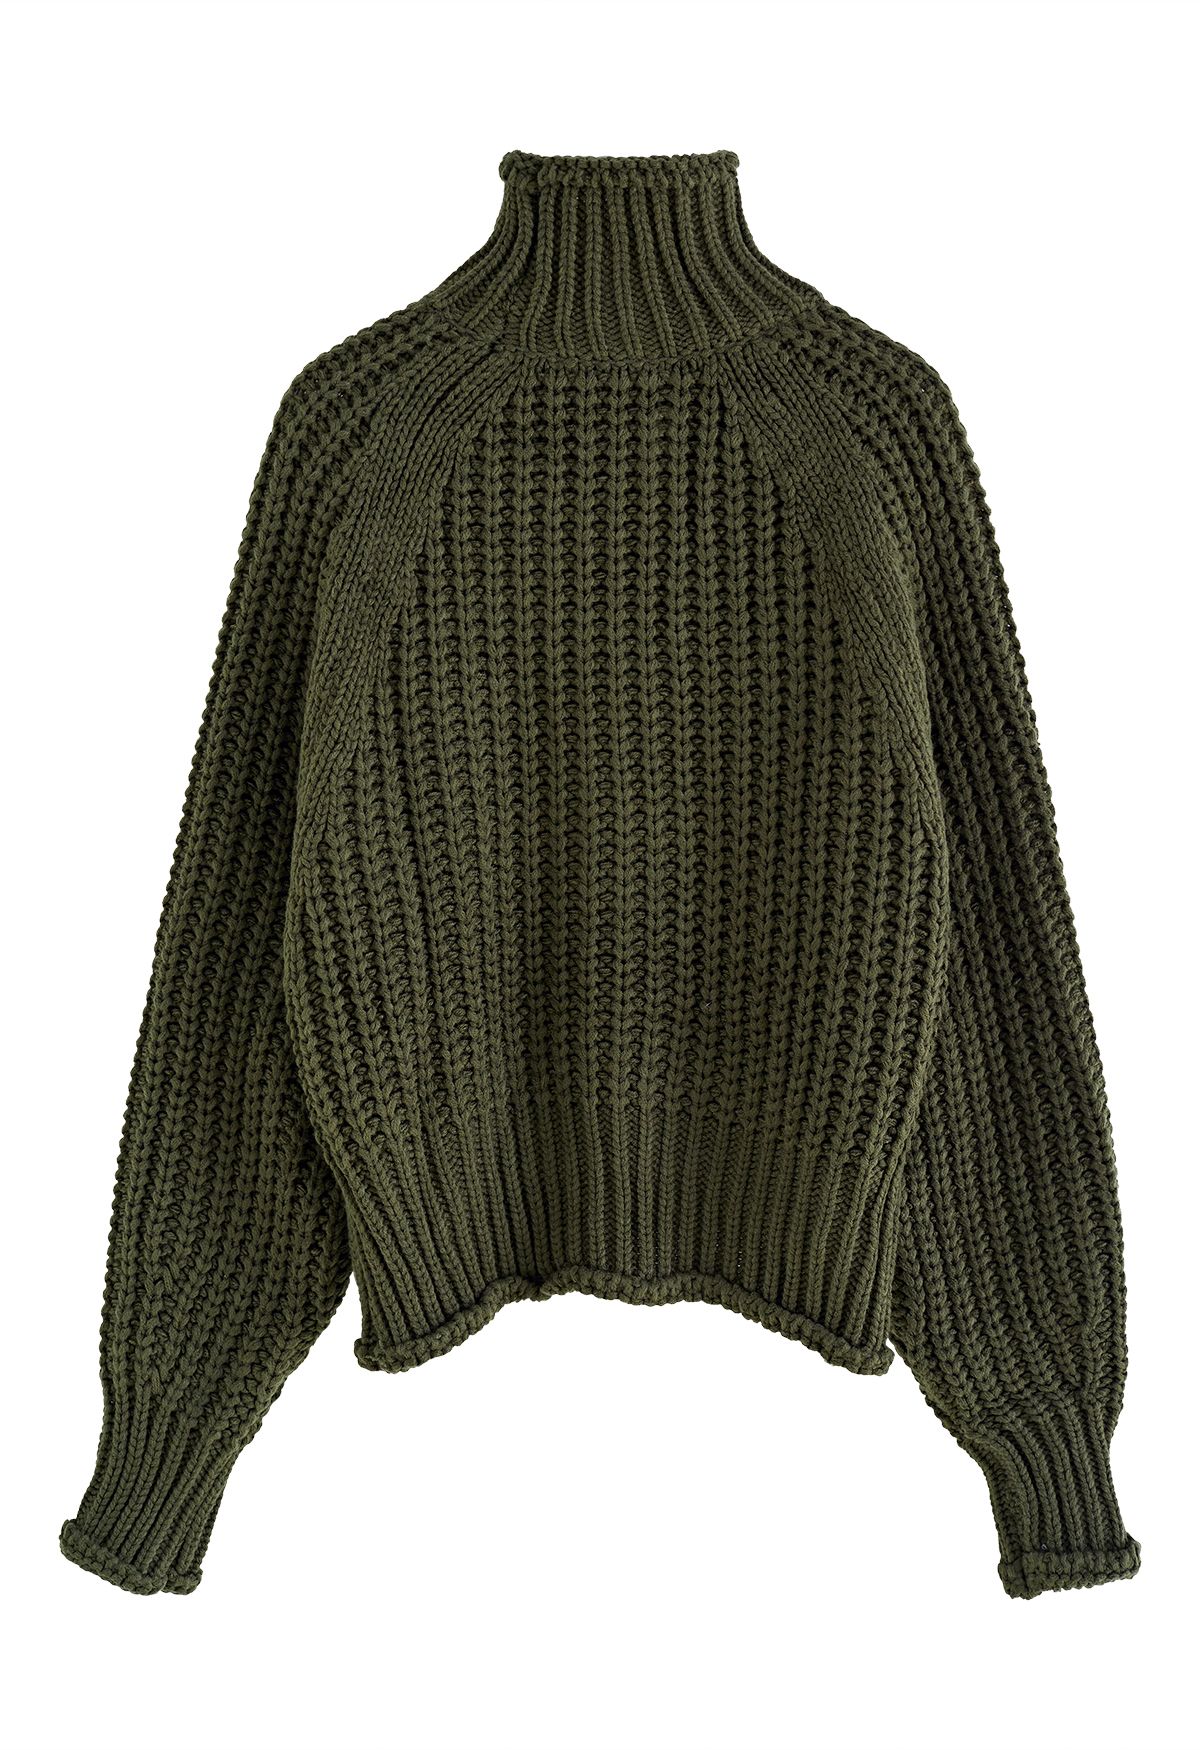 High Neck Chunky Knit Sweater in Army Green - Retro, Indie and Unique ...